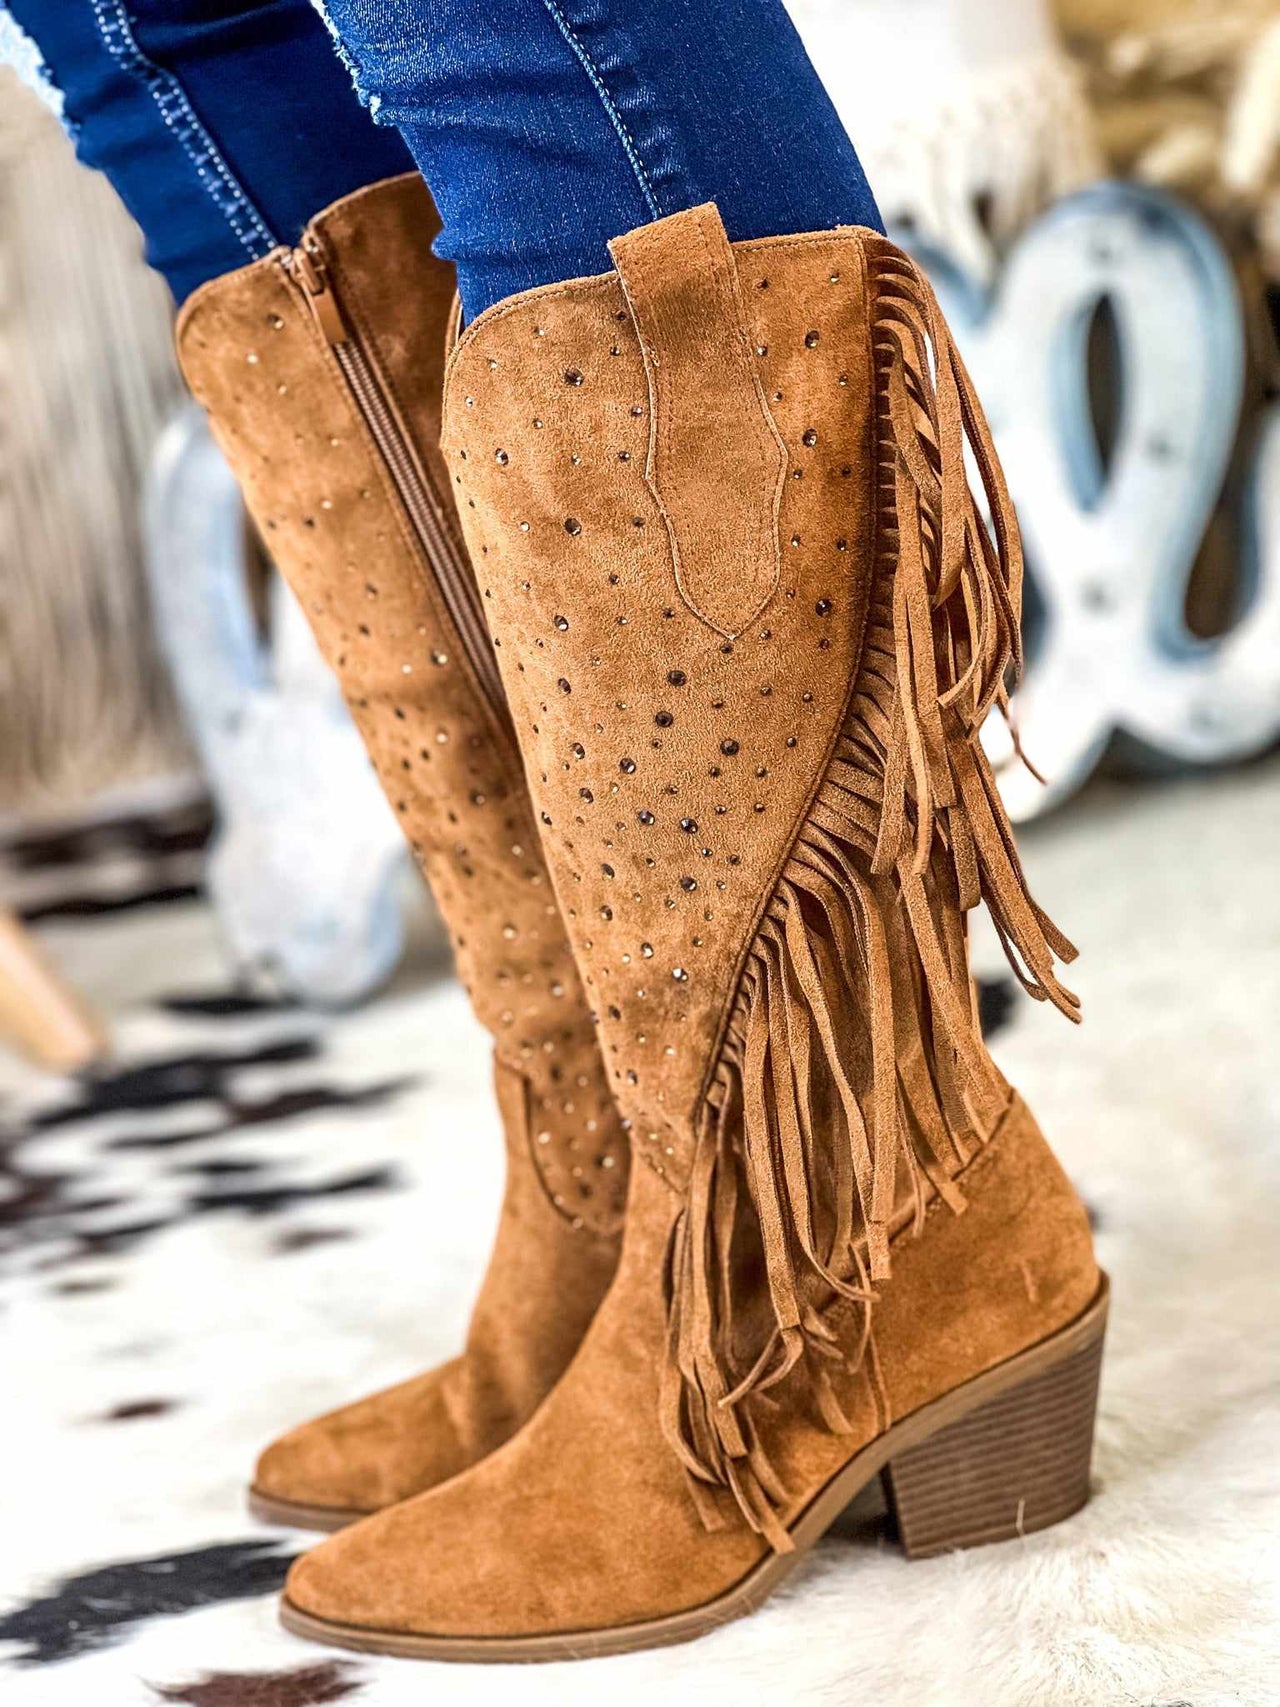 Brown suede fringe western boots.